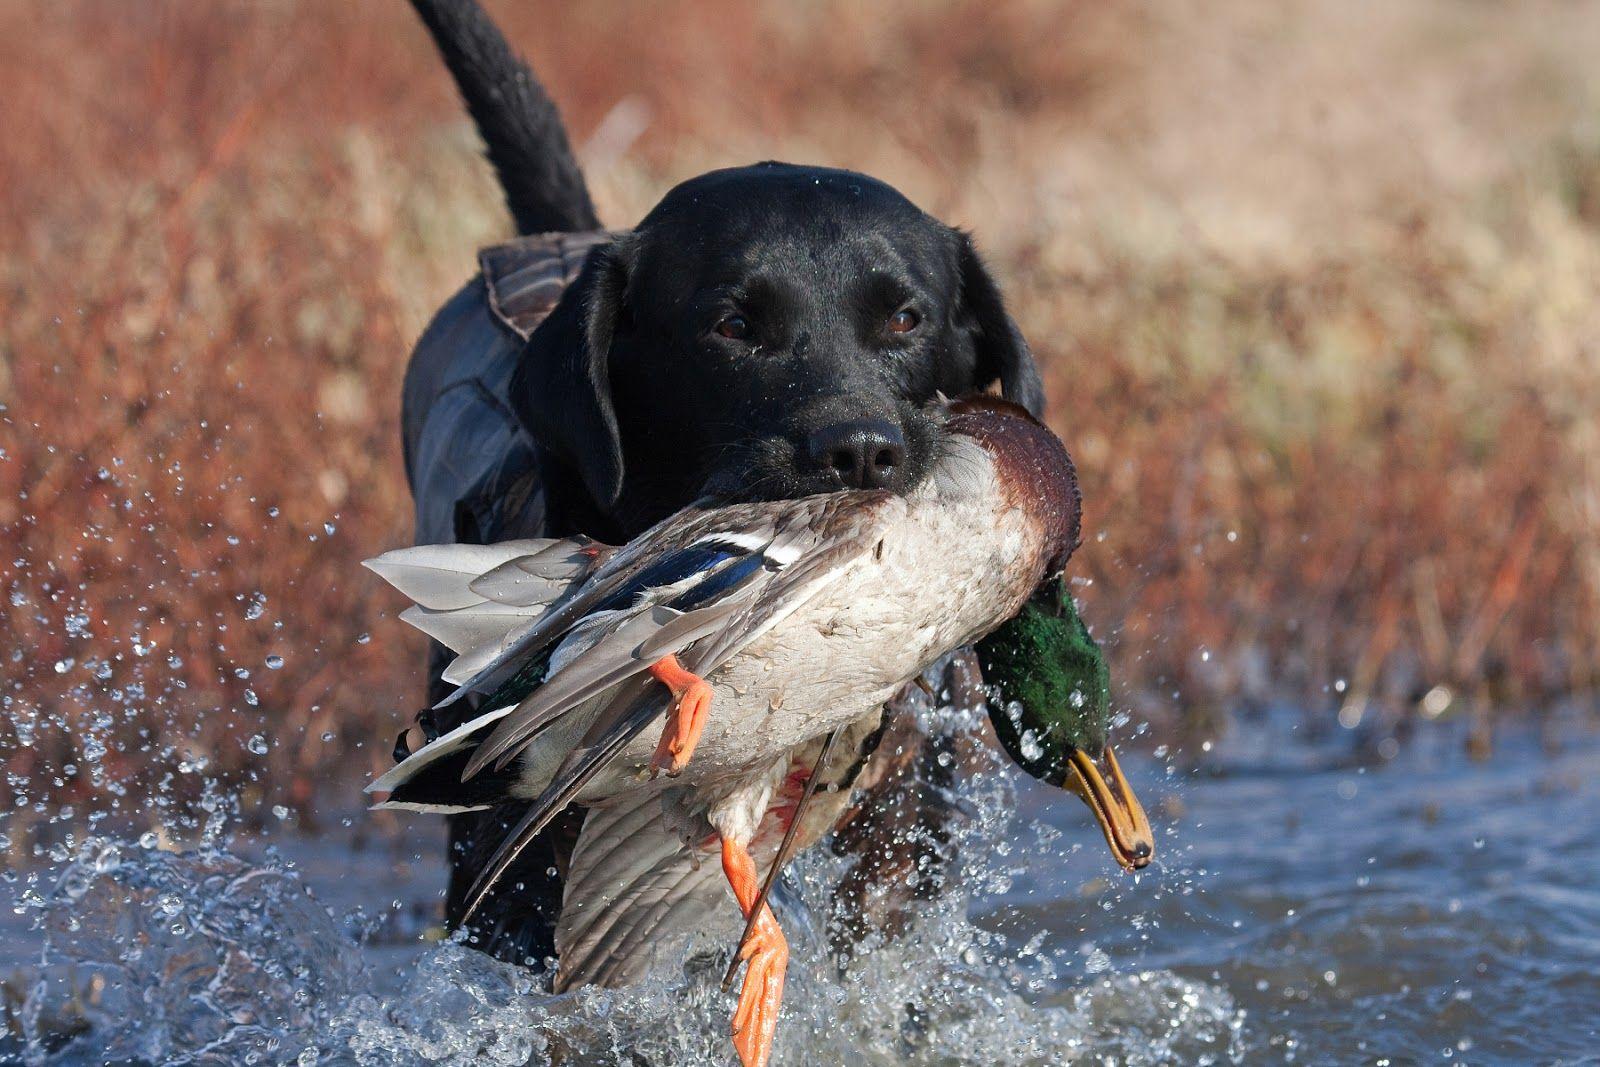 Duck Hunting Wallpapers Dog - The duck hunt dog is a character from the nes video game, duck